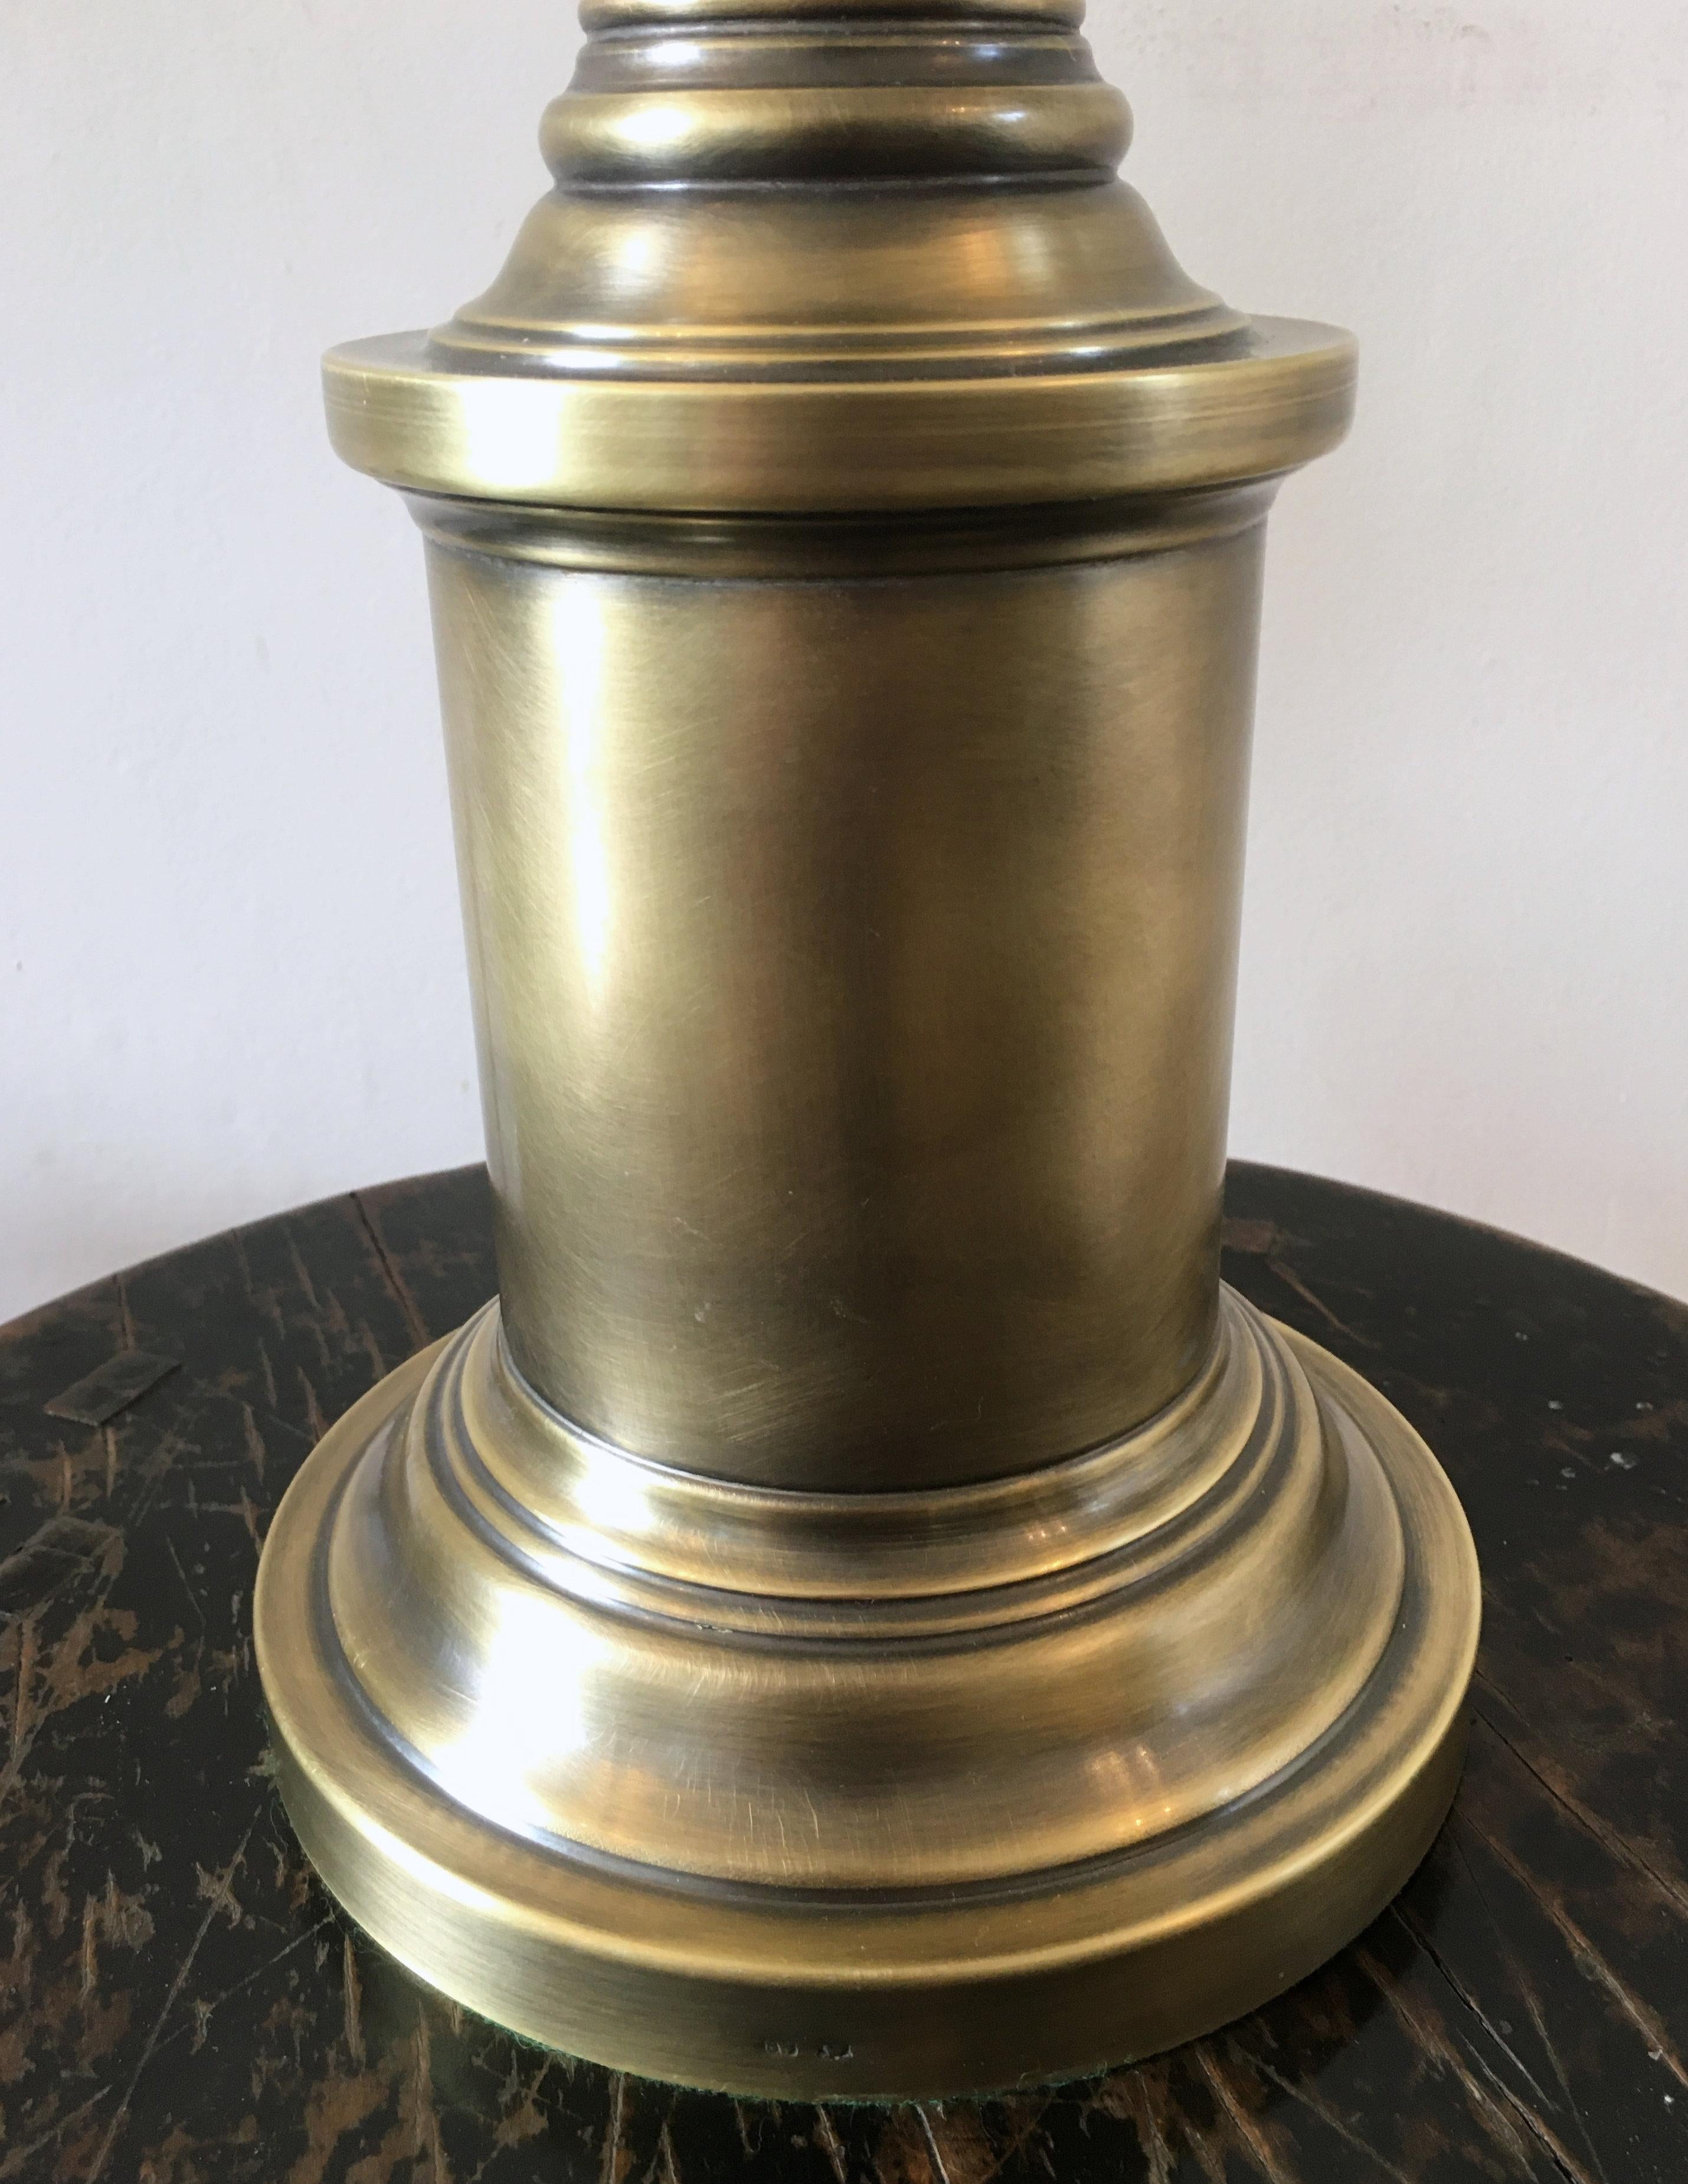 These sleek and elegant burnished brass table lamps have a slender column design with bayonet fittings. Each light measures 6 in - 15 cm diameter on the base with a height of 25 in - 63.5 cm. The pair would make a very stylish lighting feature for a